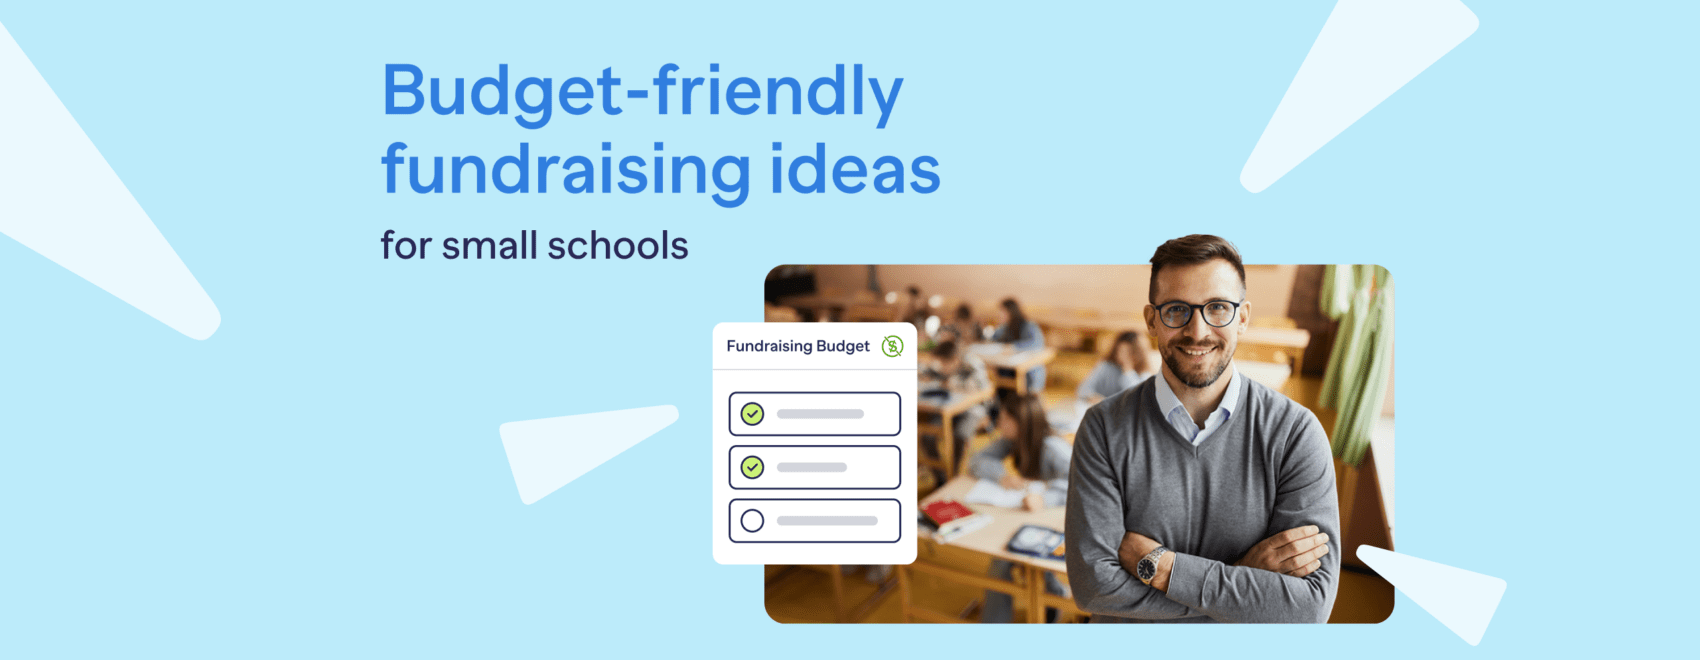 Budget friendly fundraising ideas for small schools